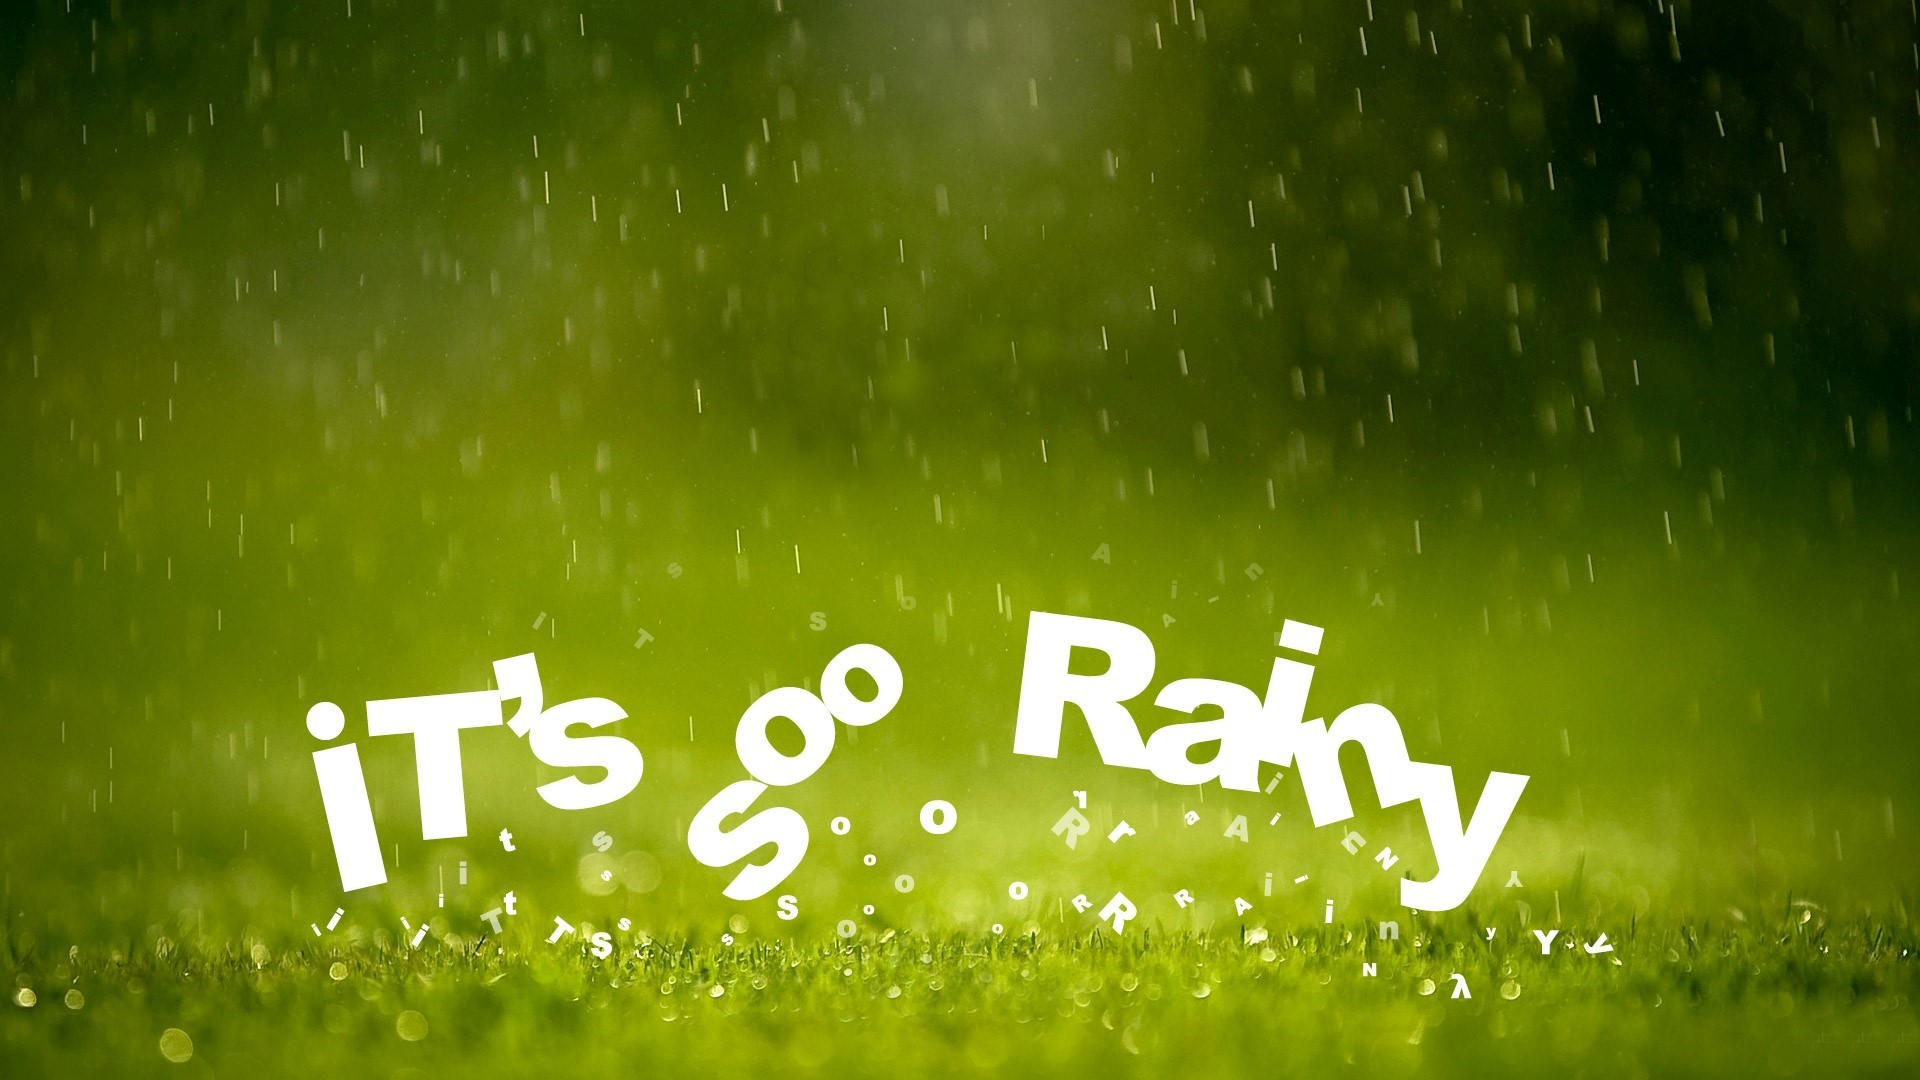 1920x1080 New Rainy Wallpapers, Rainy Backgrounds NMgnCP PC Gallery 1920Ã1080 Raining  Wallpapers (42